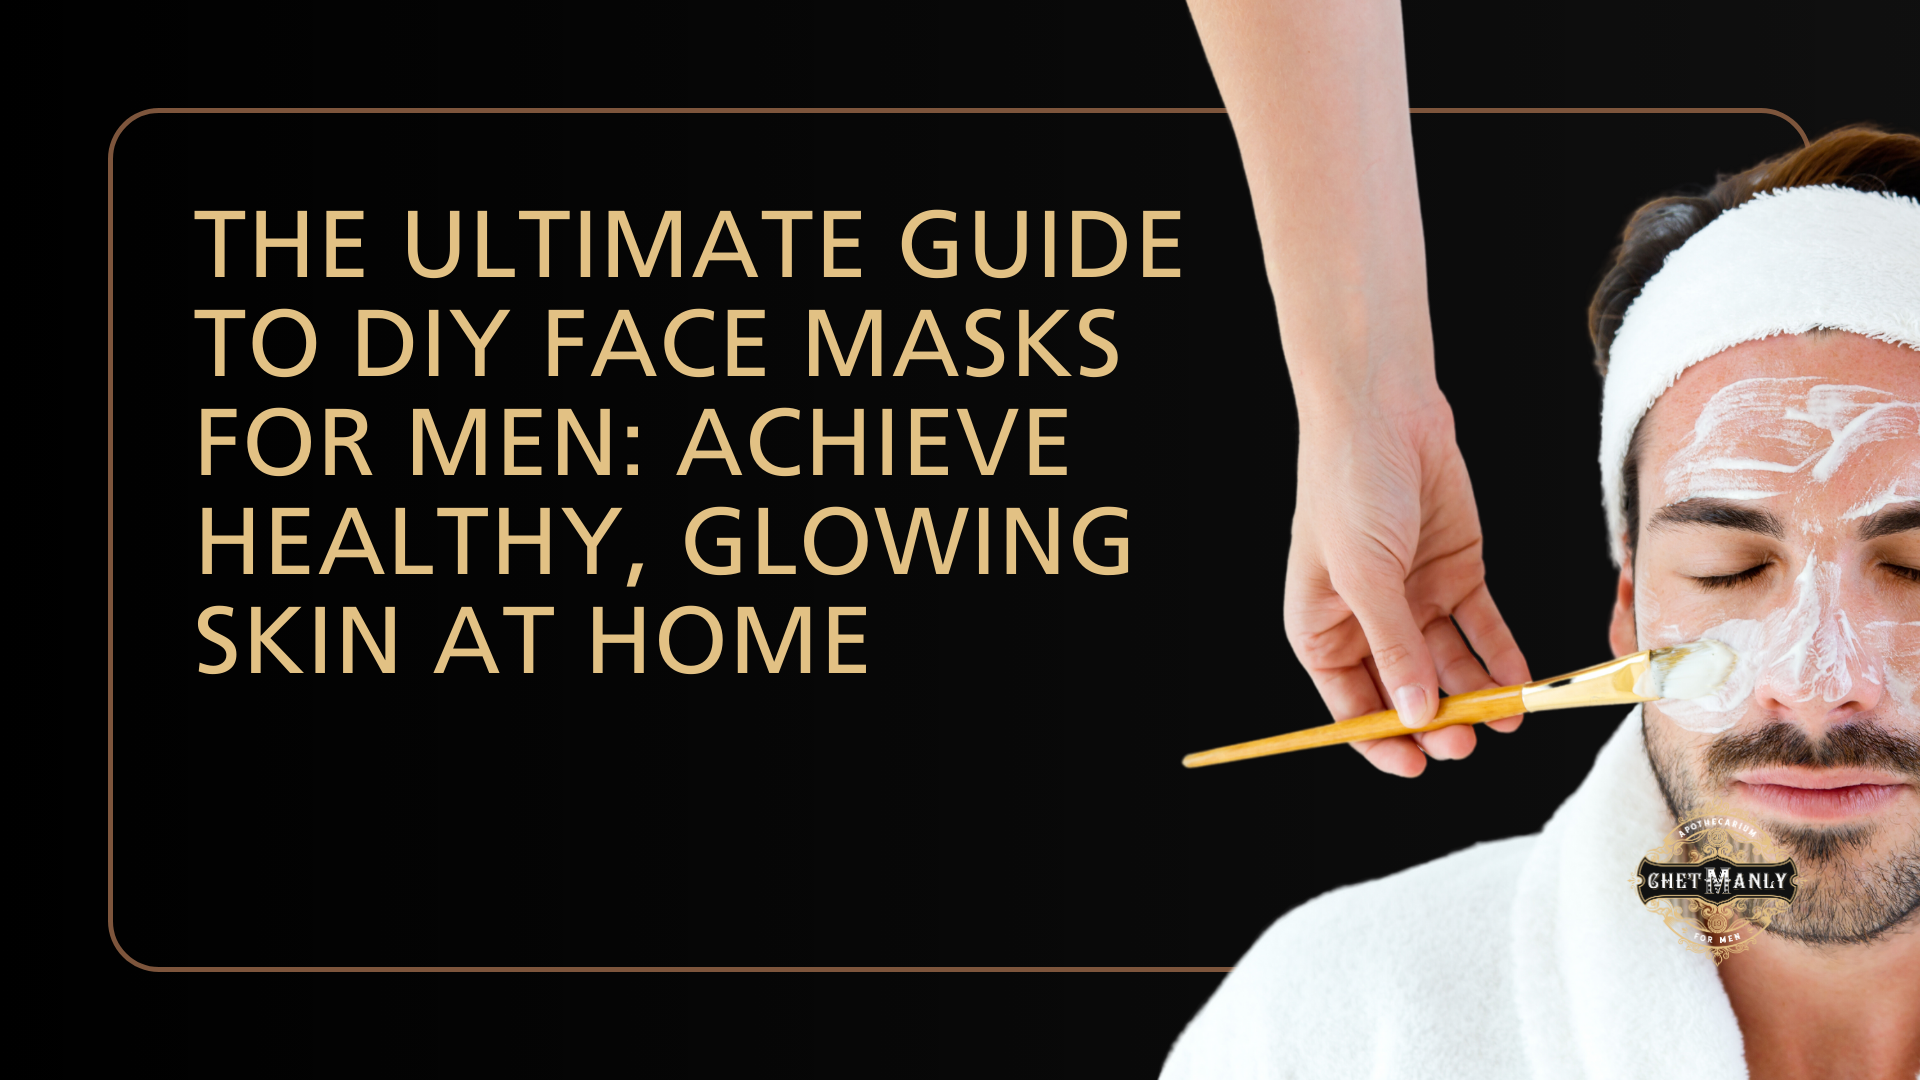 The Ultimate Guide to DIY Face Masks for Men: Achieve Healthy, Glowing Skin at Home